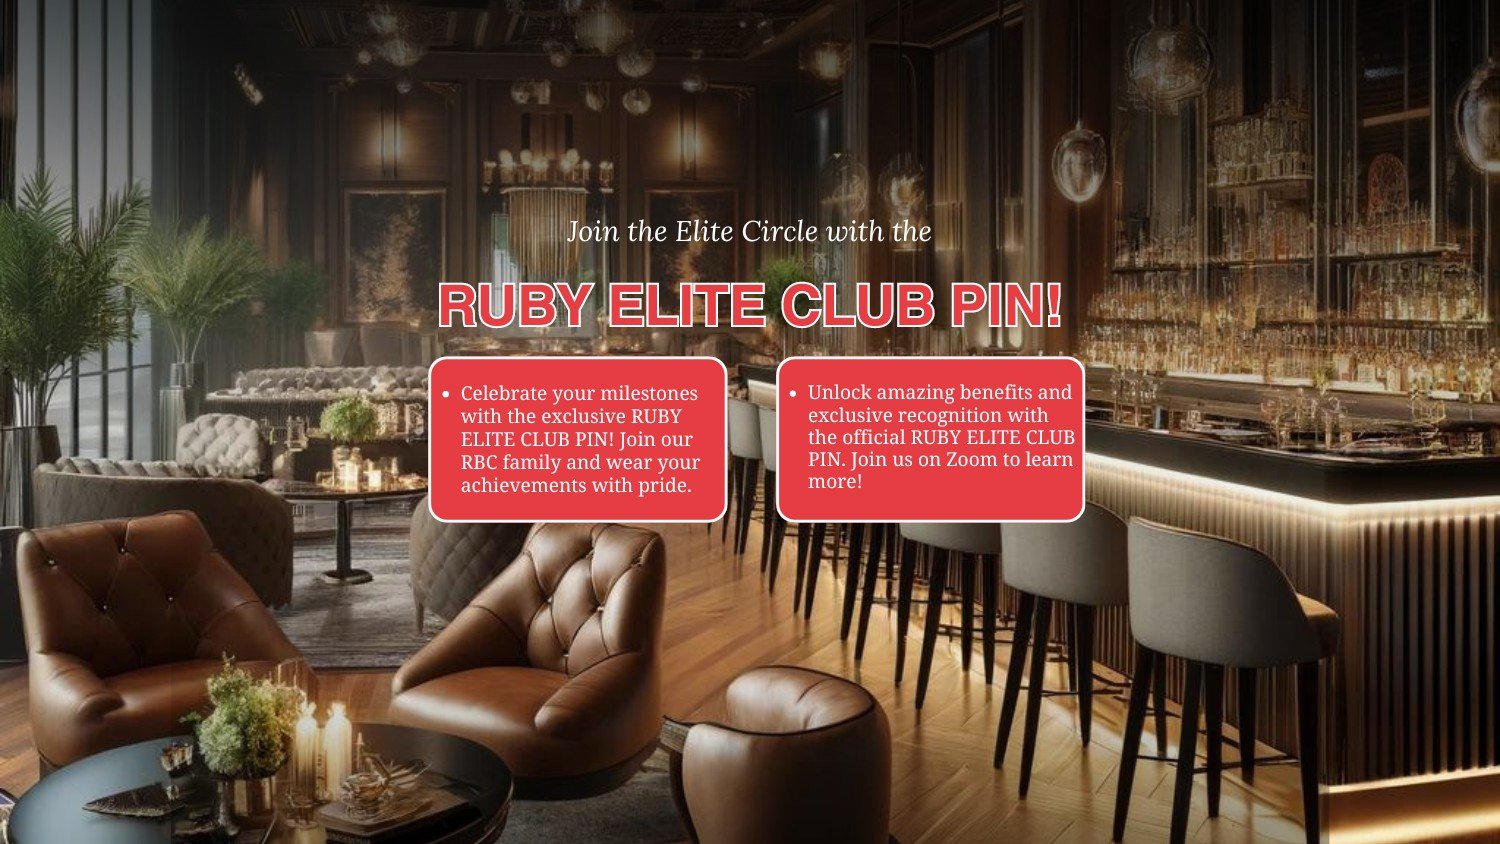 Join the Elite Circle with the Ruby Elite Club